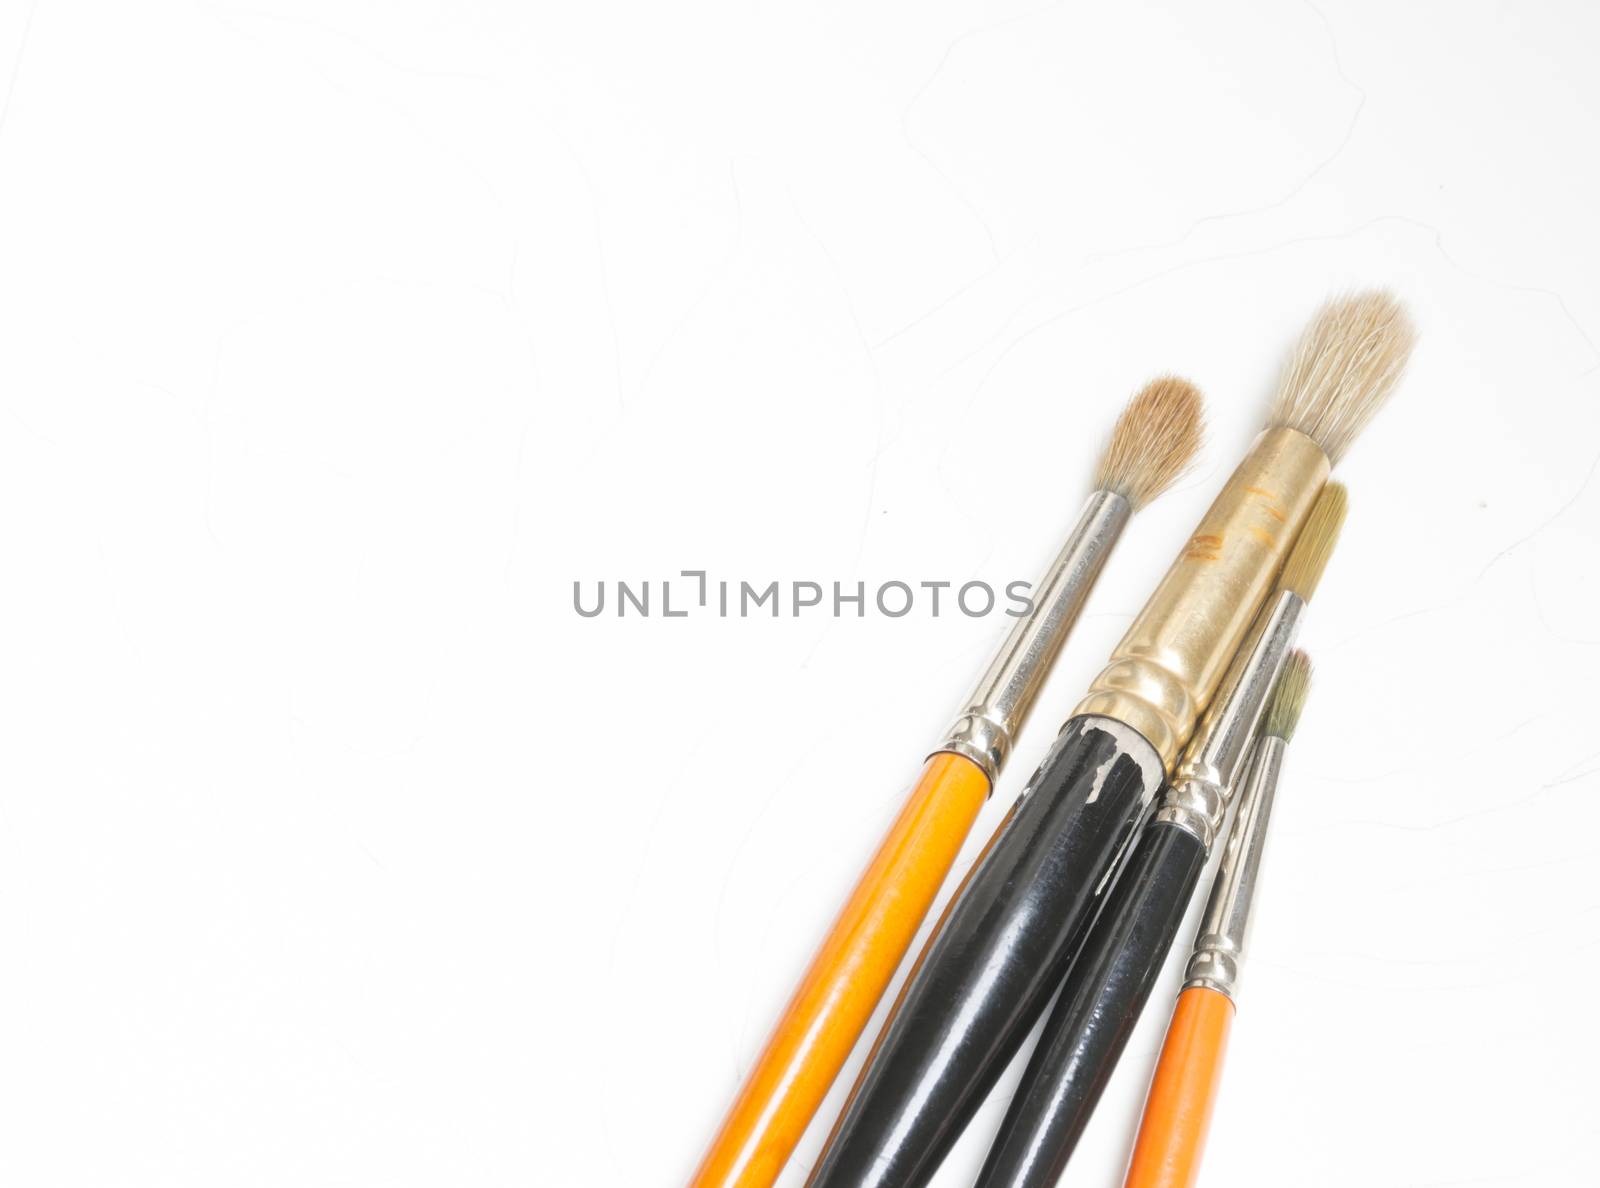 Watercolor brushes. Artist tools - used watercolor brushes of the fine Kolinsky type on white.